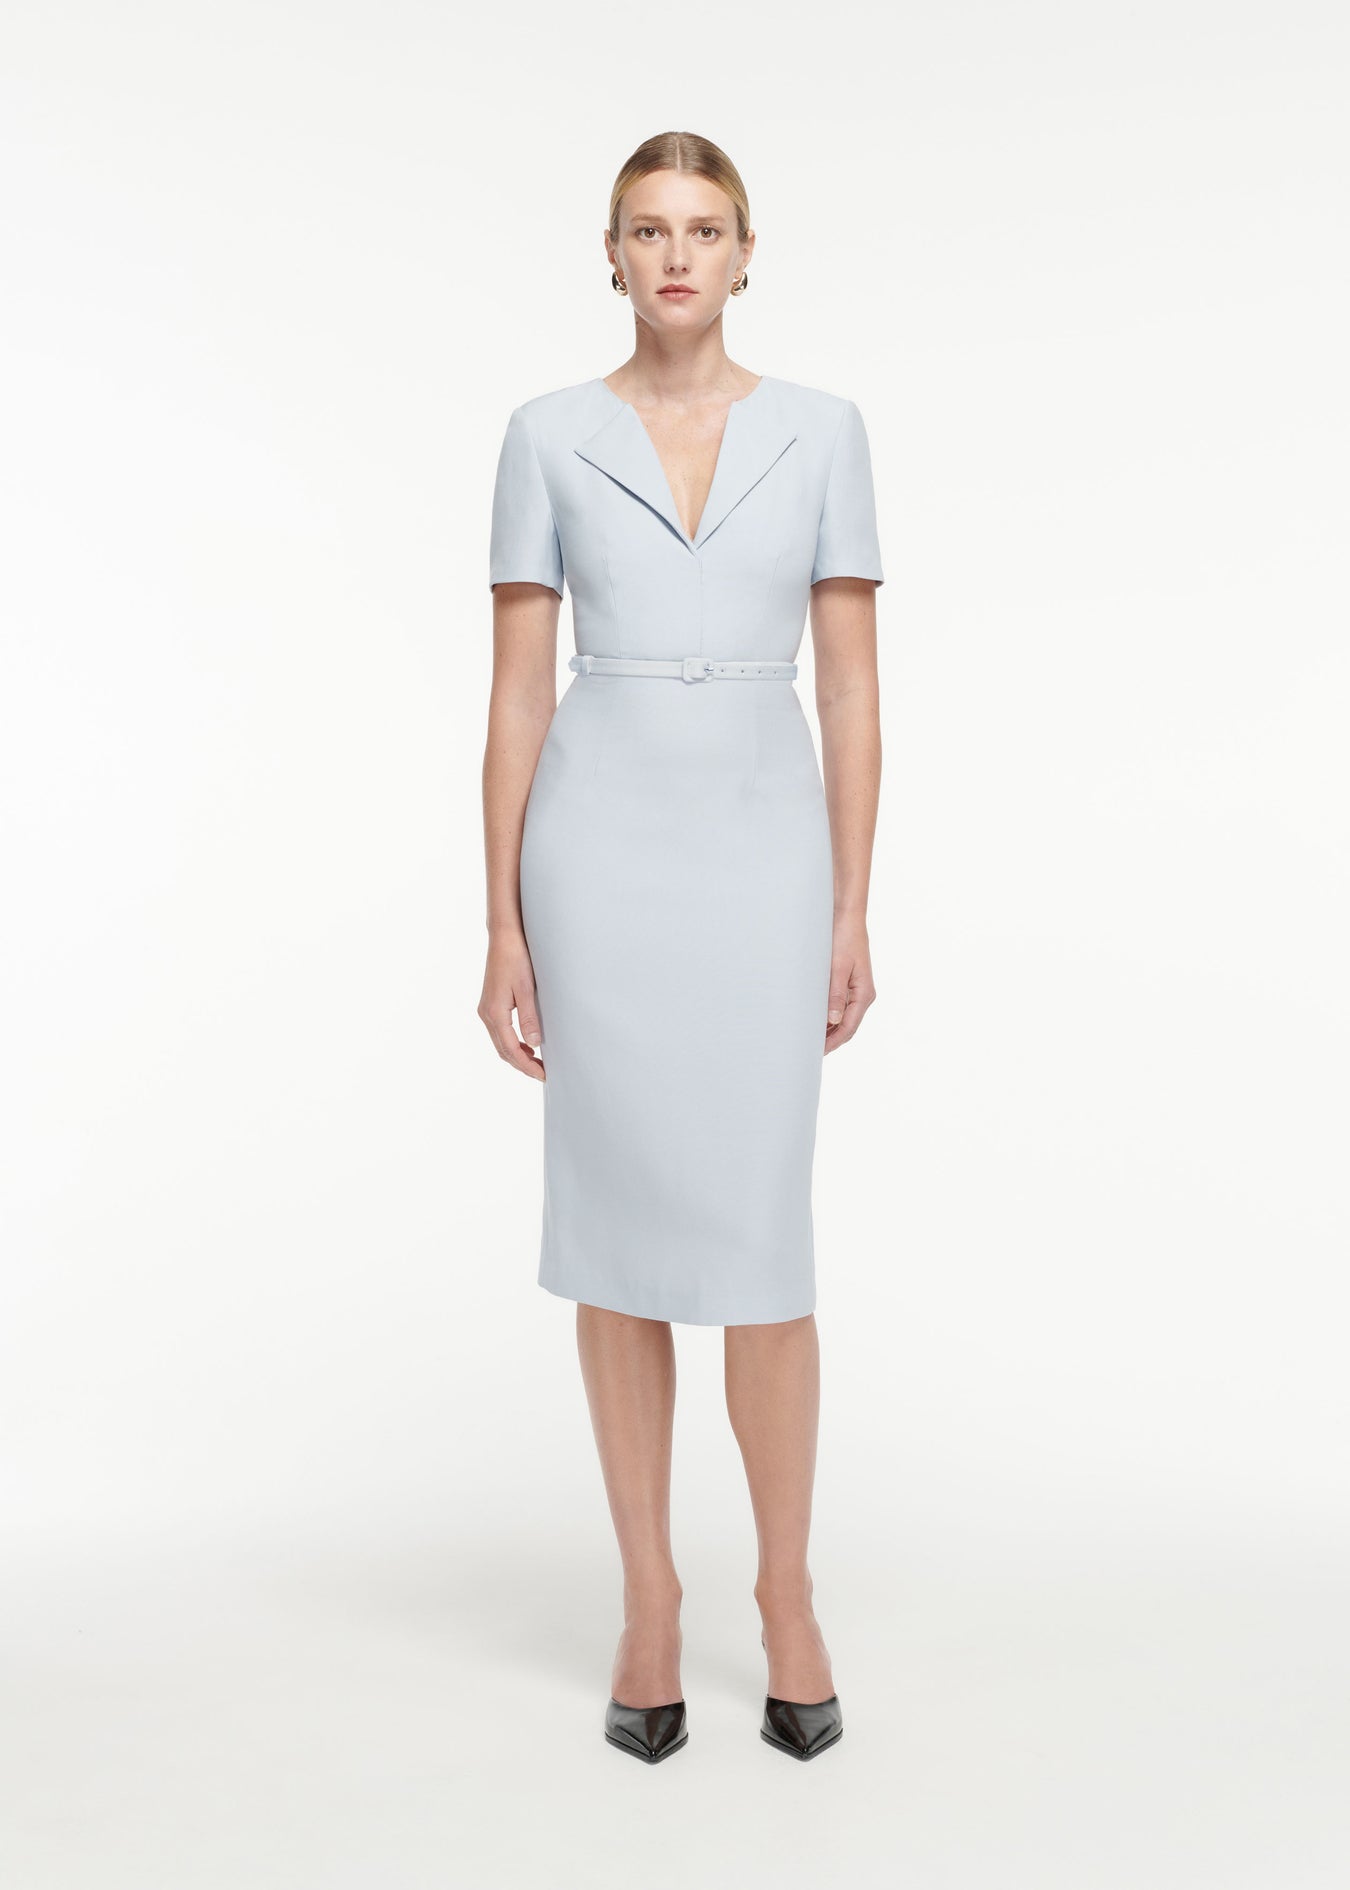 Calvin Klein Day Dresses for Women - Shop Now at Farfetch Canada